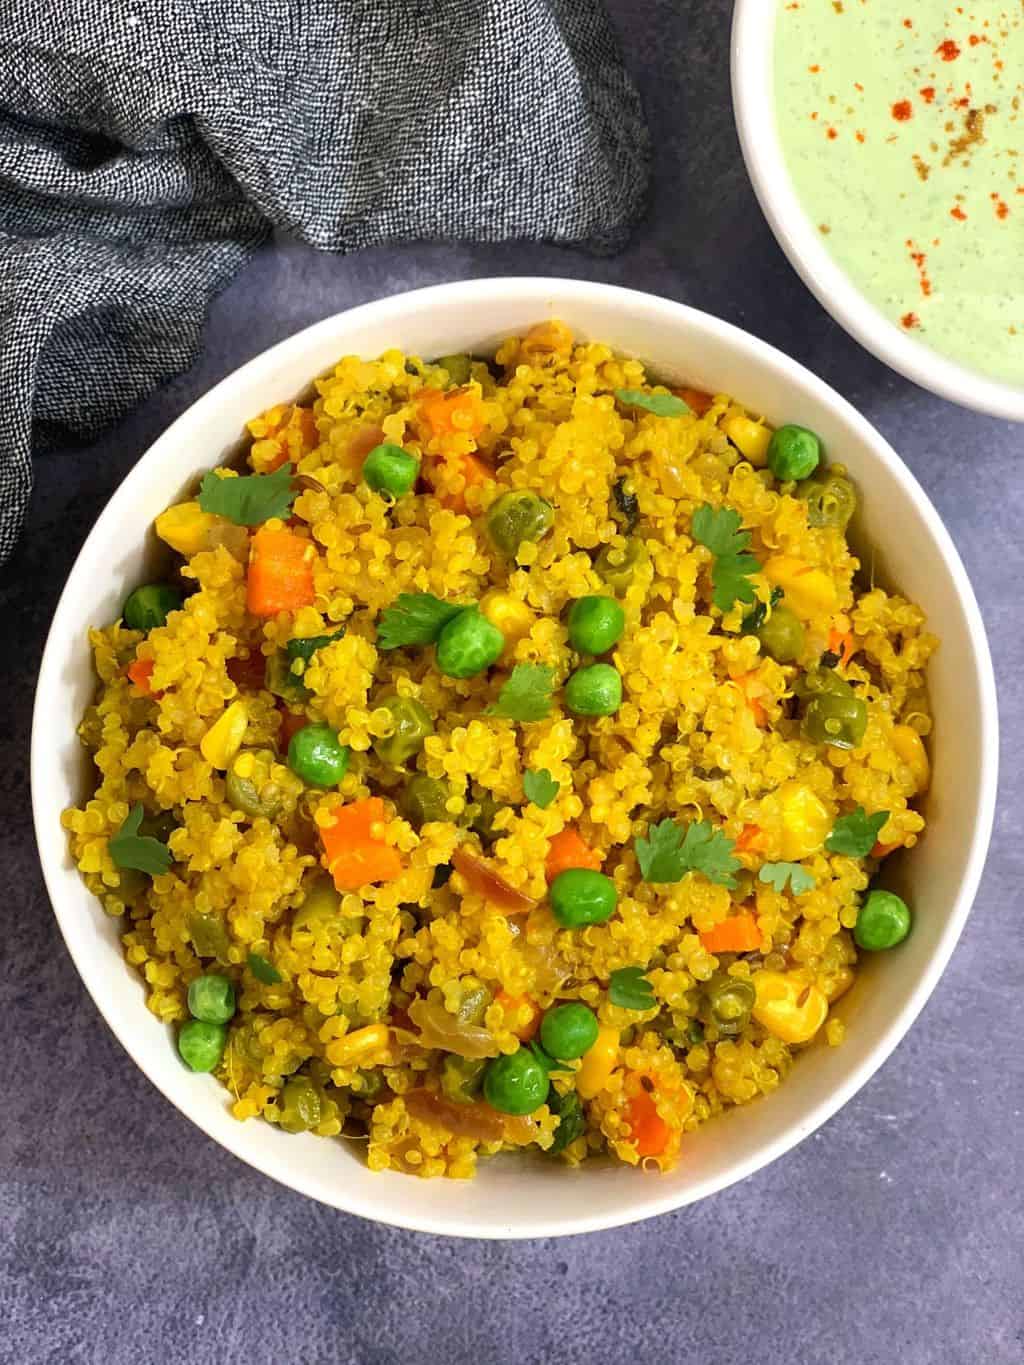 instant pot vegetable quinoa pulao/pilaf served in a white bowl with raita on side